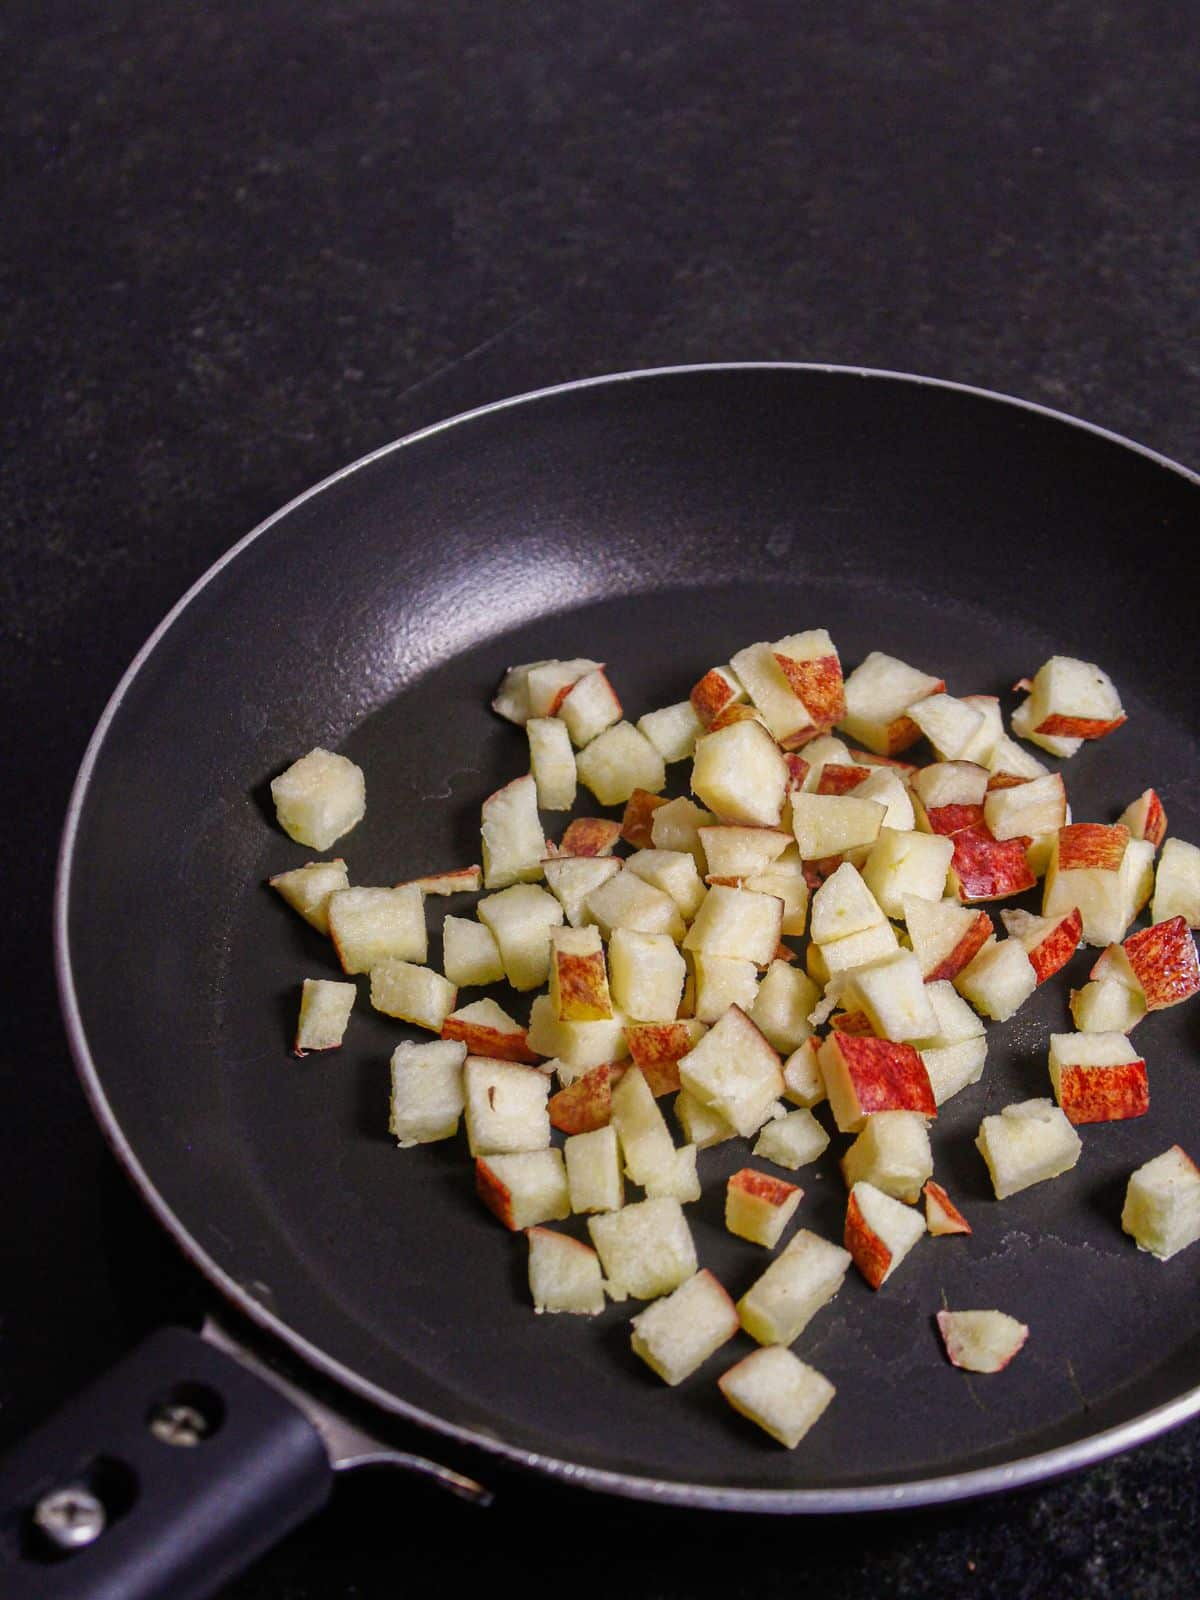 Take apple cubes in a pan with oil 